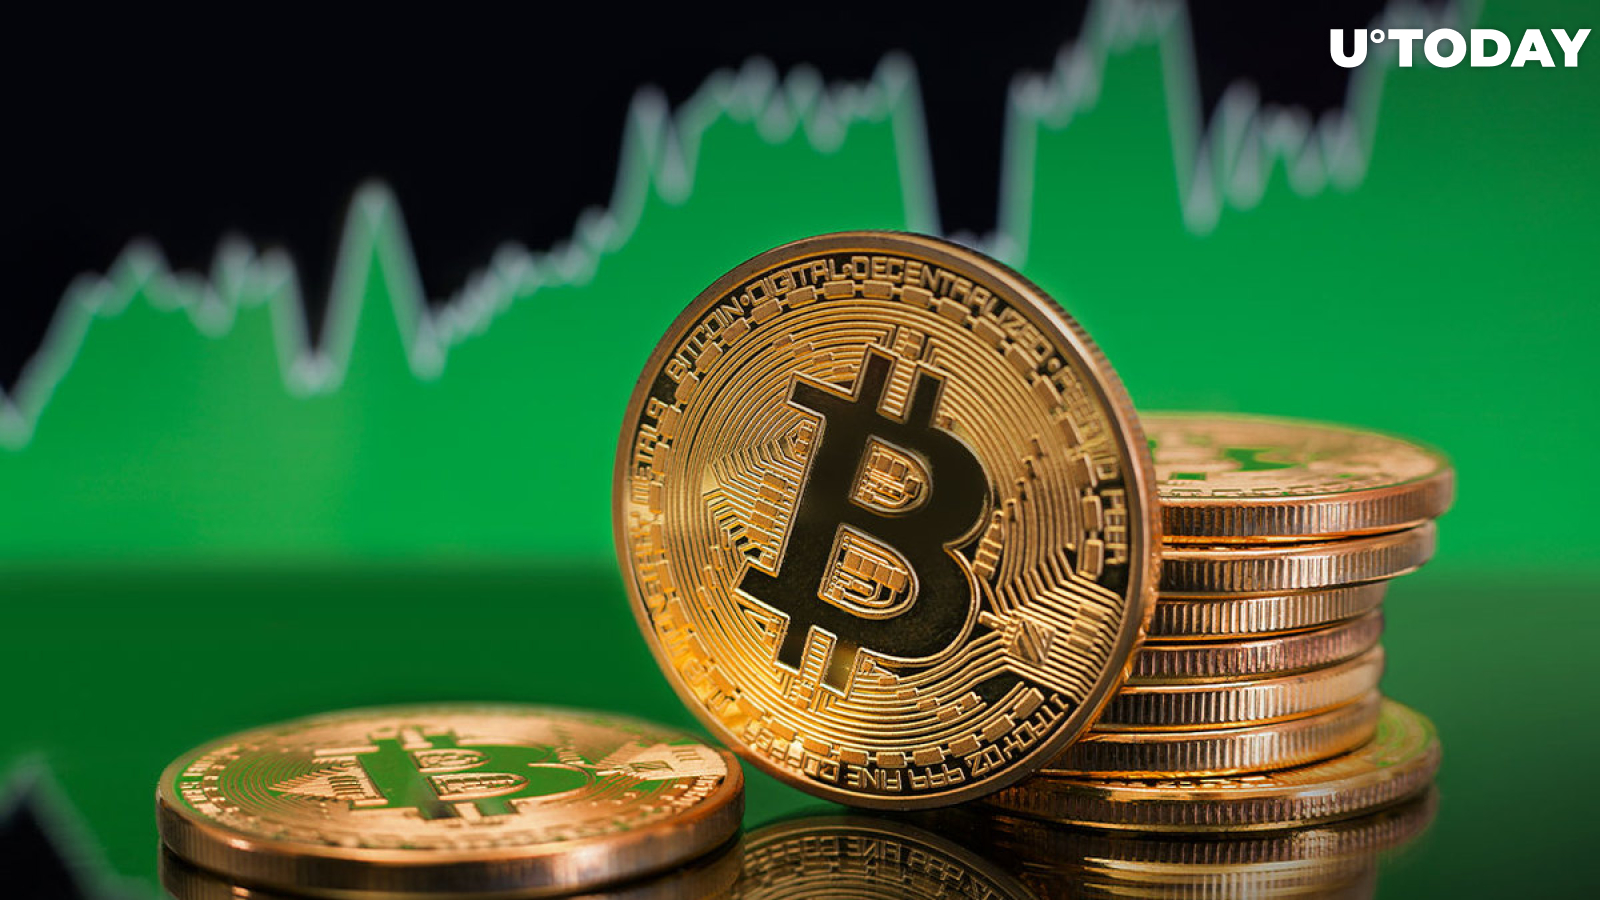 If Bitcoin Reaches This Price, We Will Have Some Serious Problems: Details